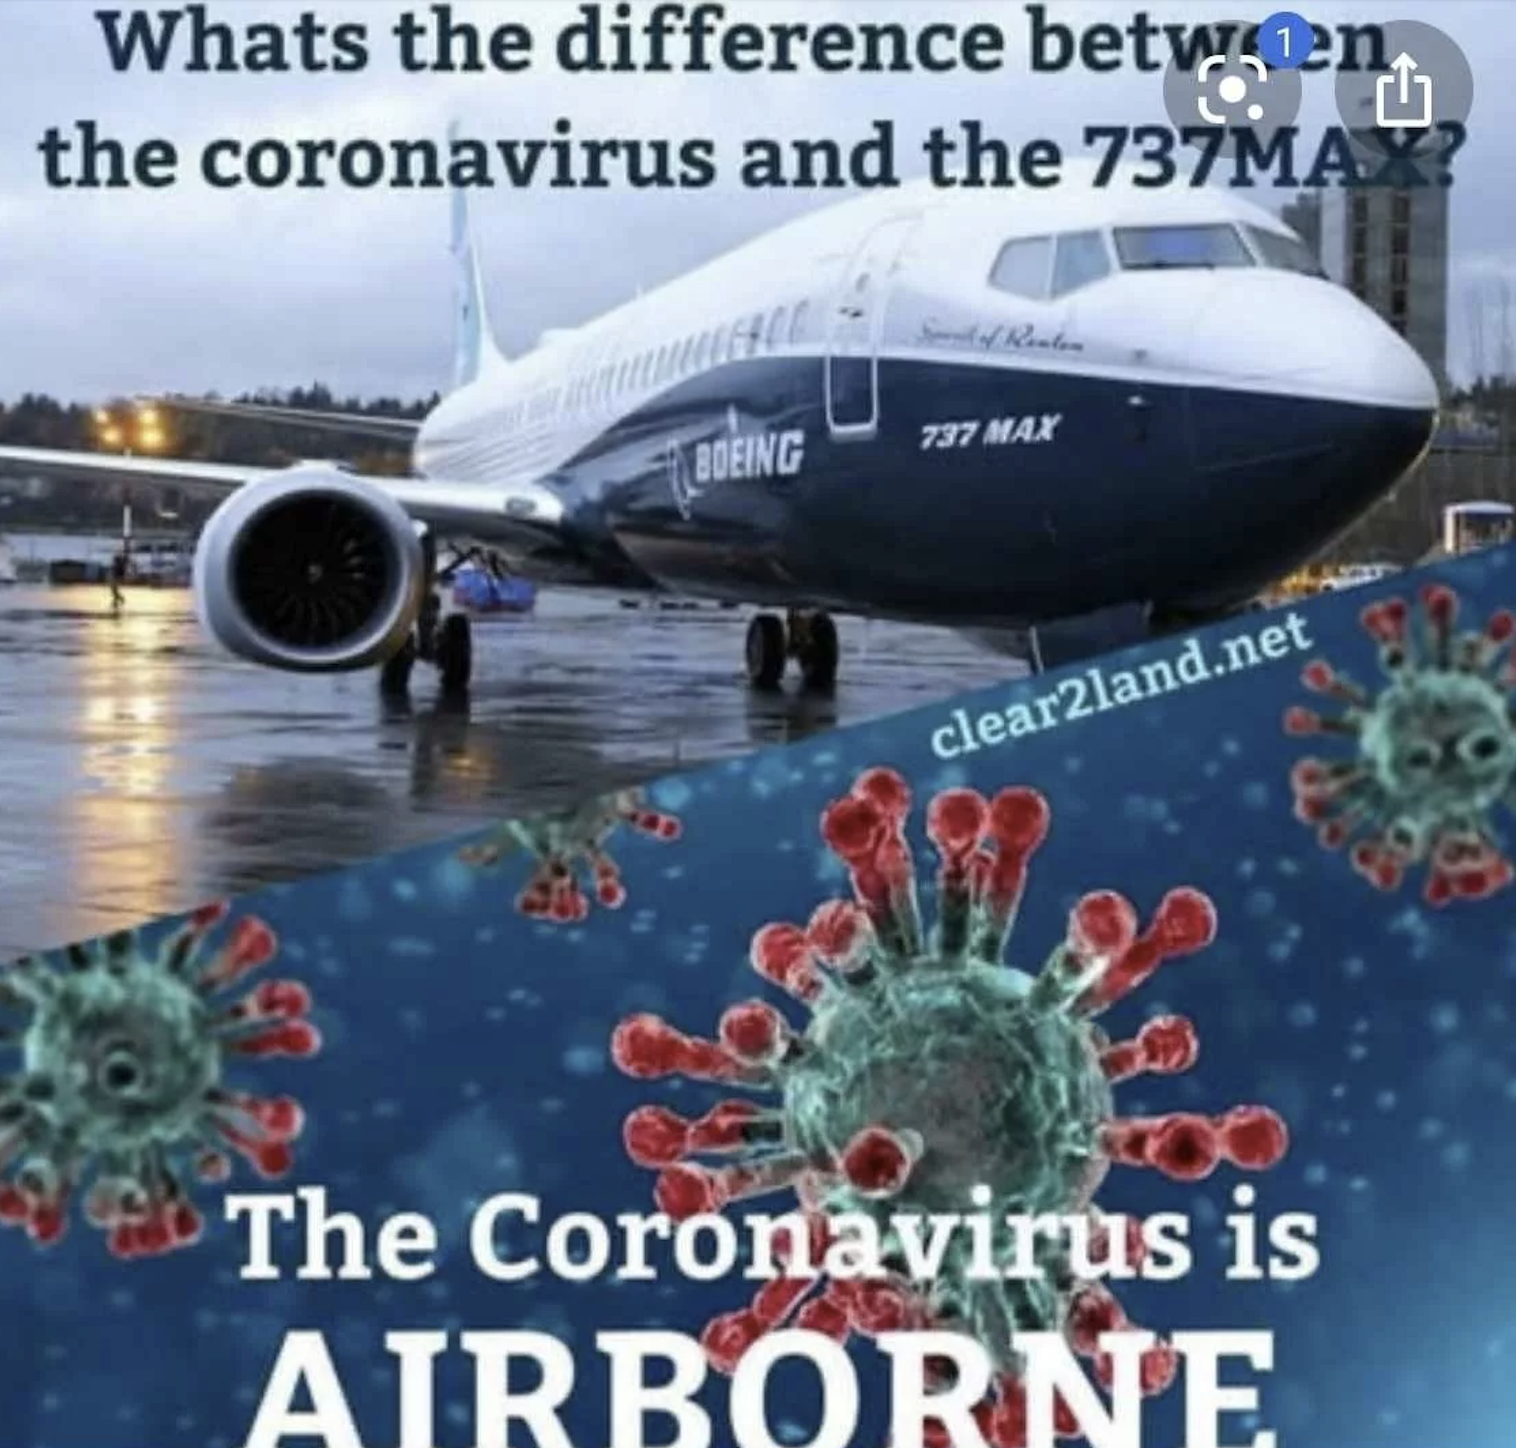 boeing 7373 - Whats the difference betwen Th the coronavirus and the 737MAX? Boeing 737 Max clear2land.net The Coronavirus is Airborne